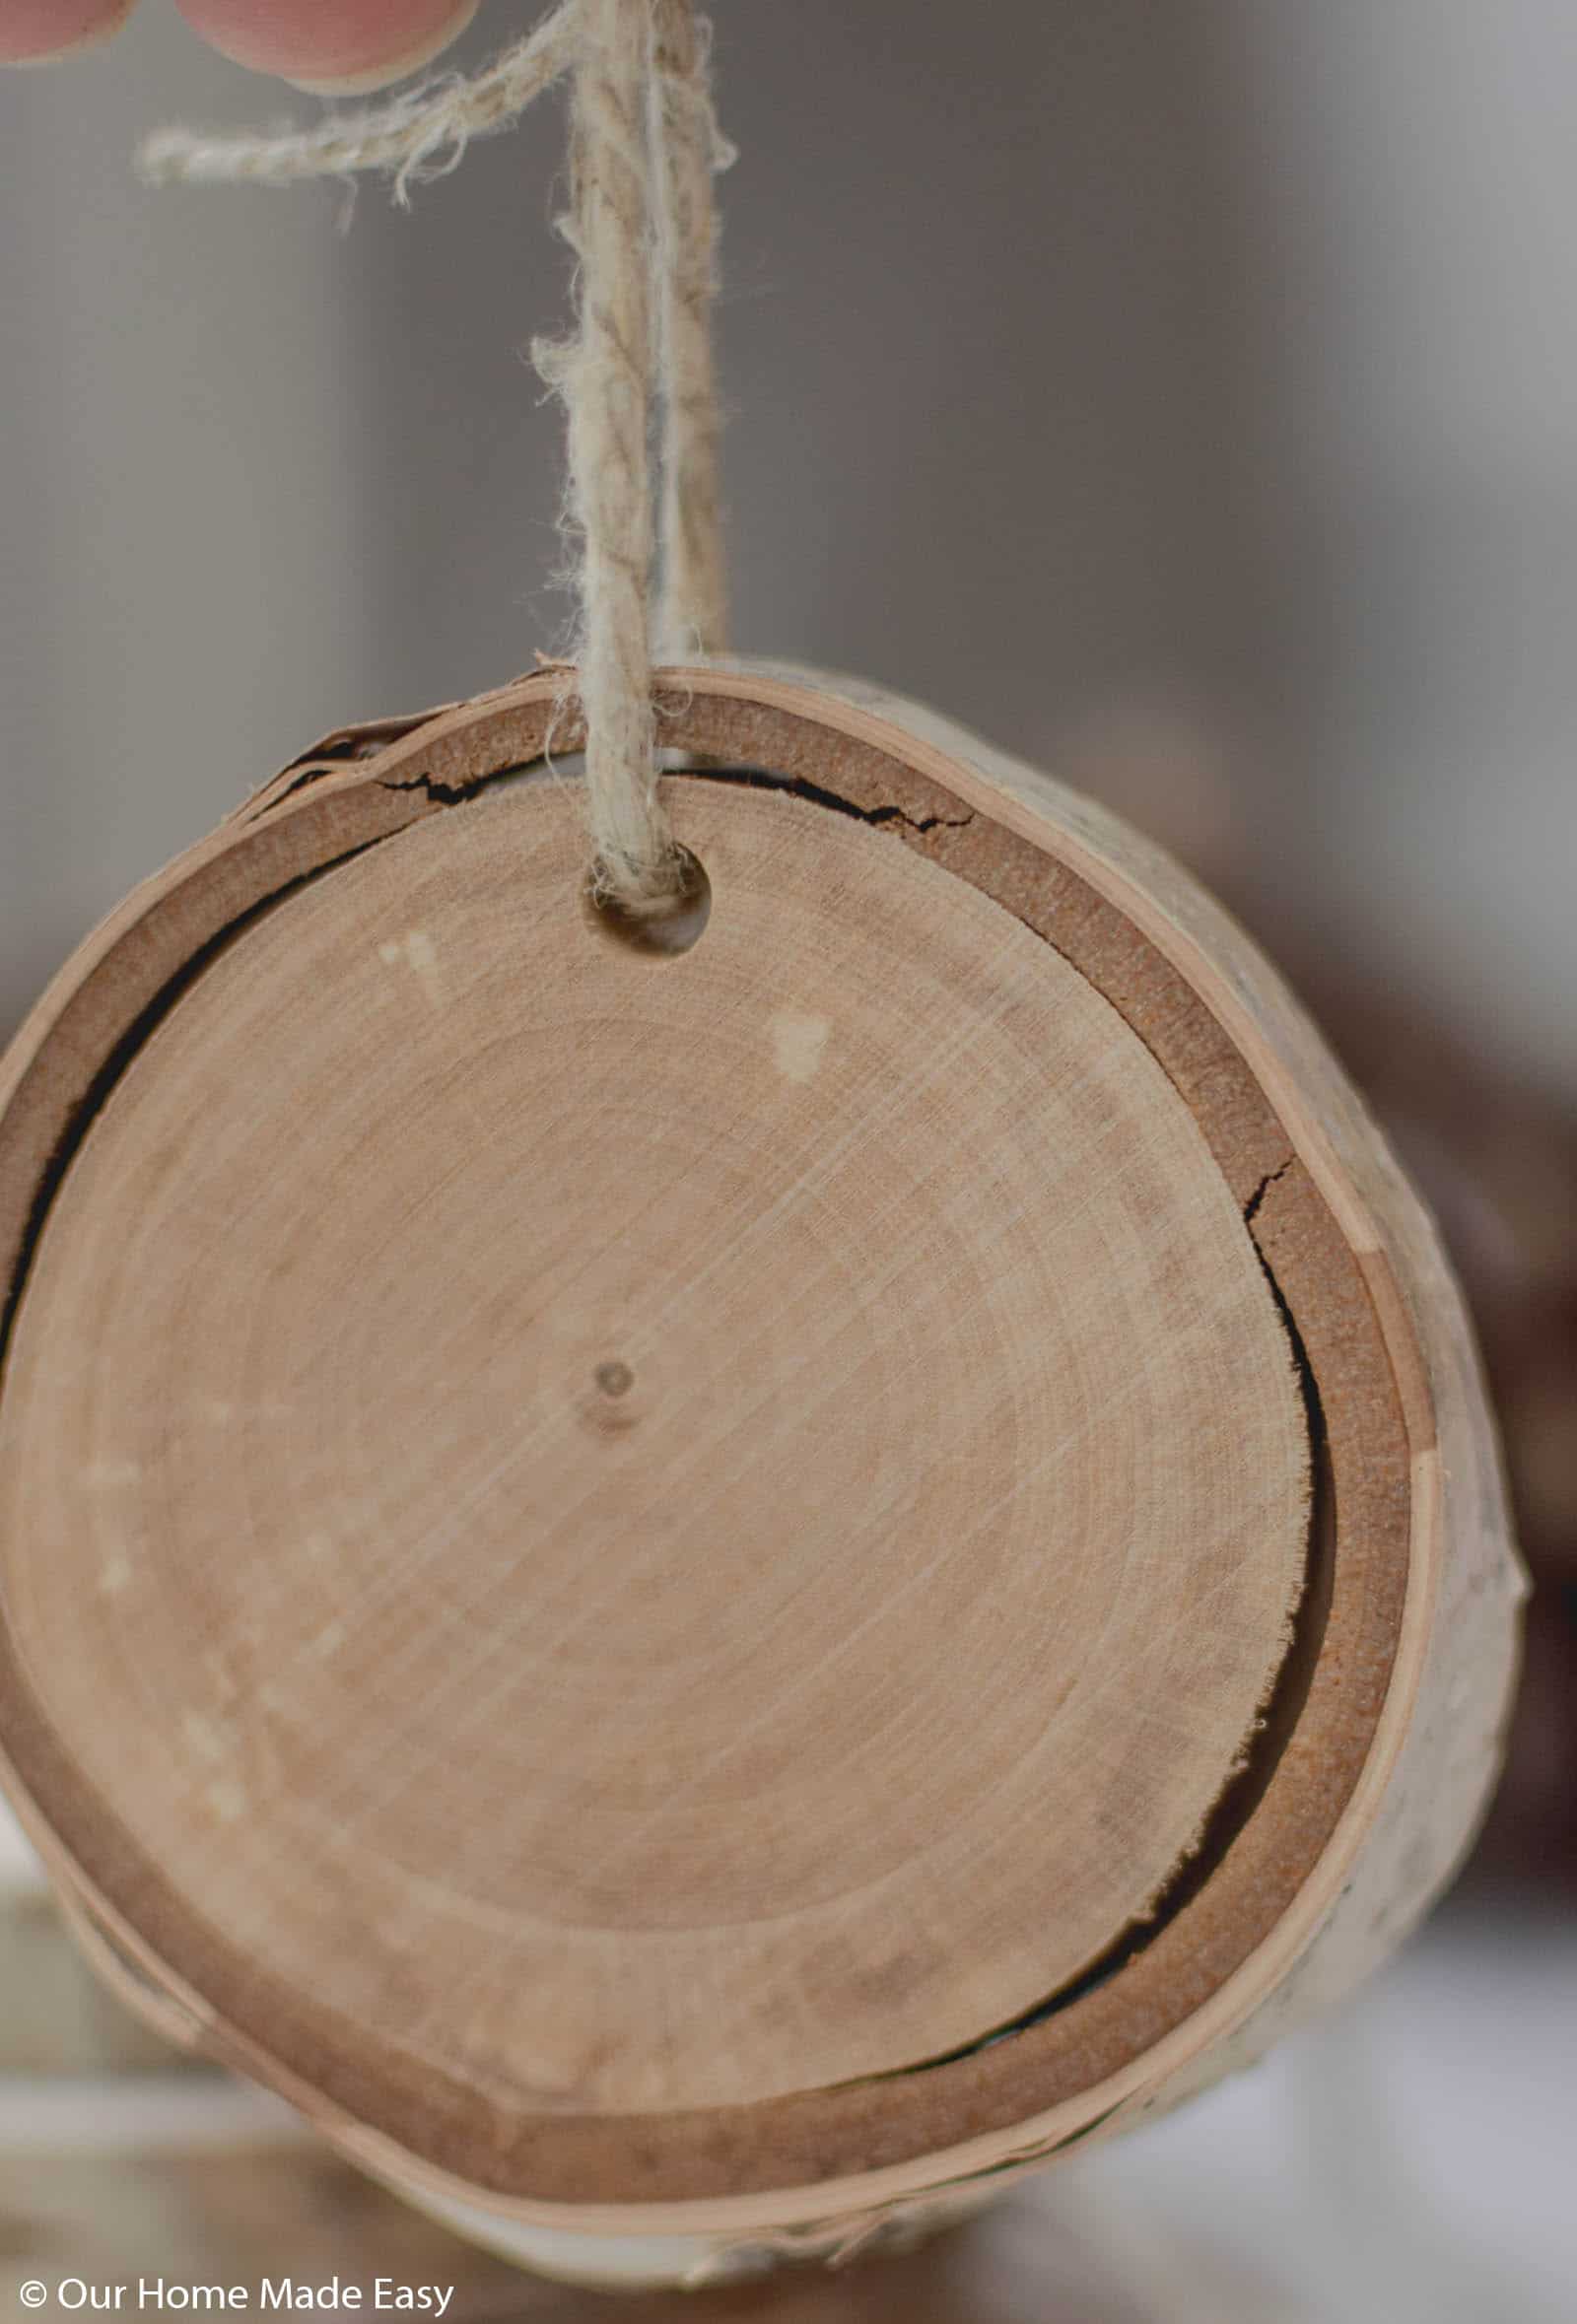 Buying pre-made wood slices makes this DIY wood slice ornament tutorial easy because you need no tools